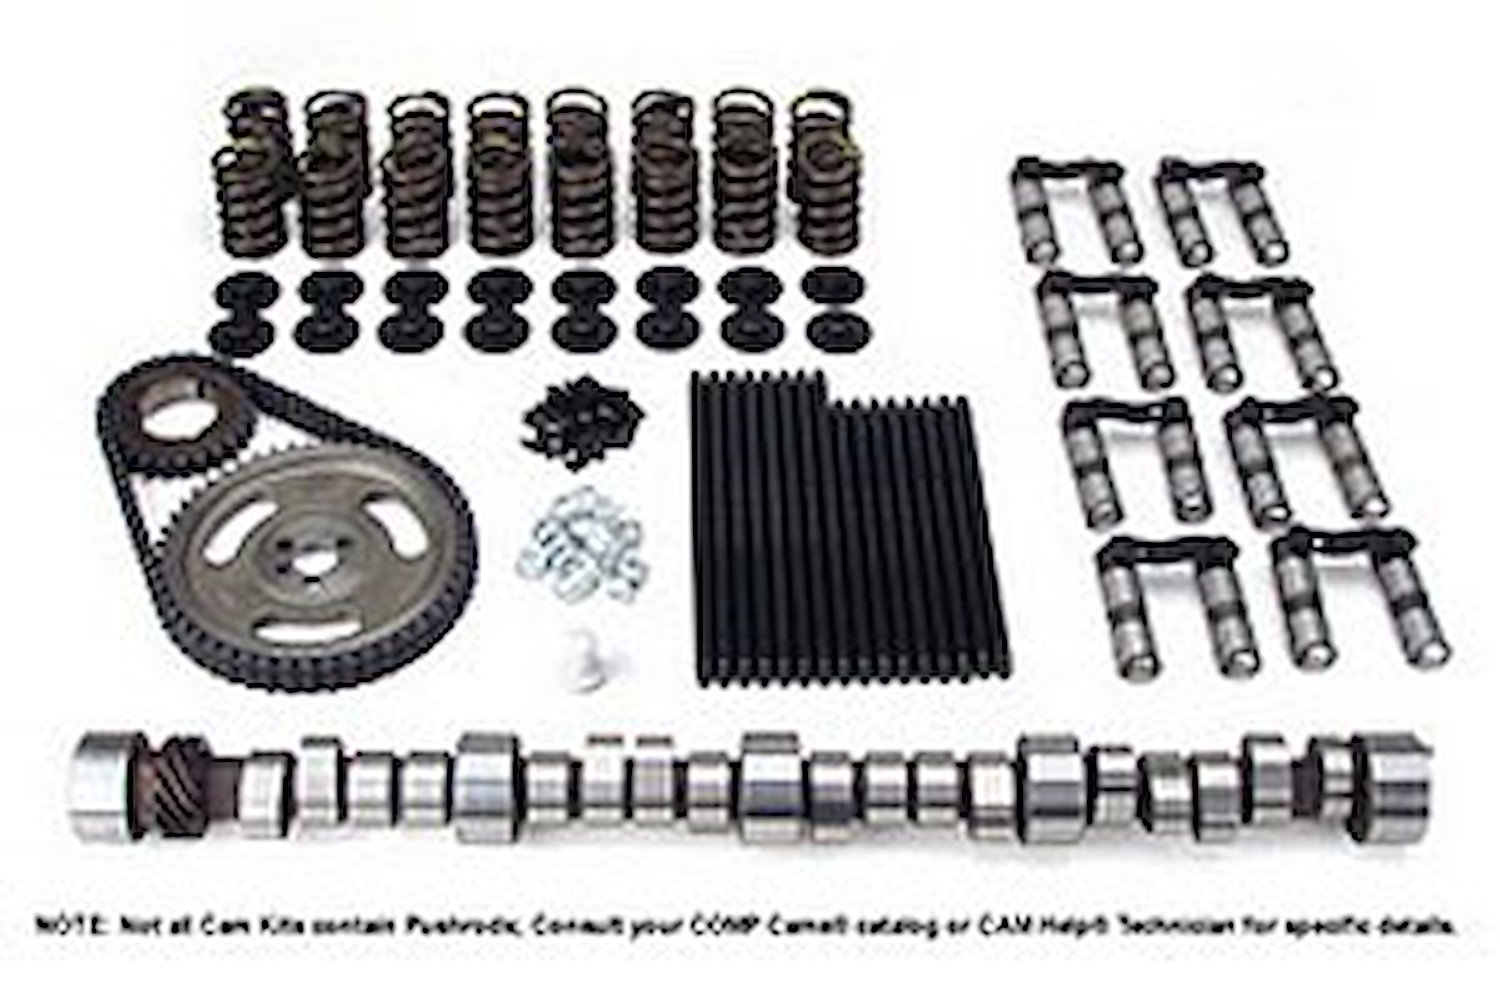 Magnum Hydraulic Roller Camshaft Complete Kit Chevy Small Block 262-400 Retro Fit Lift: .560"/.560"